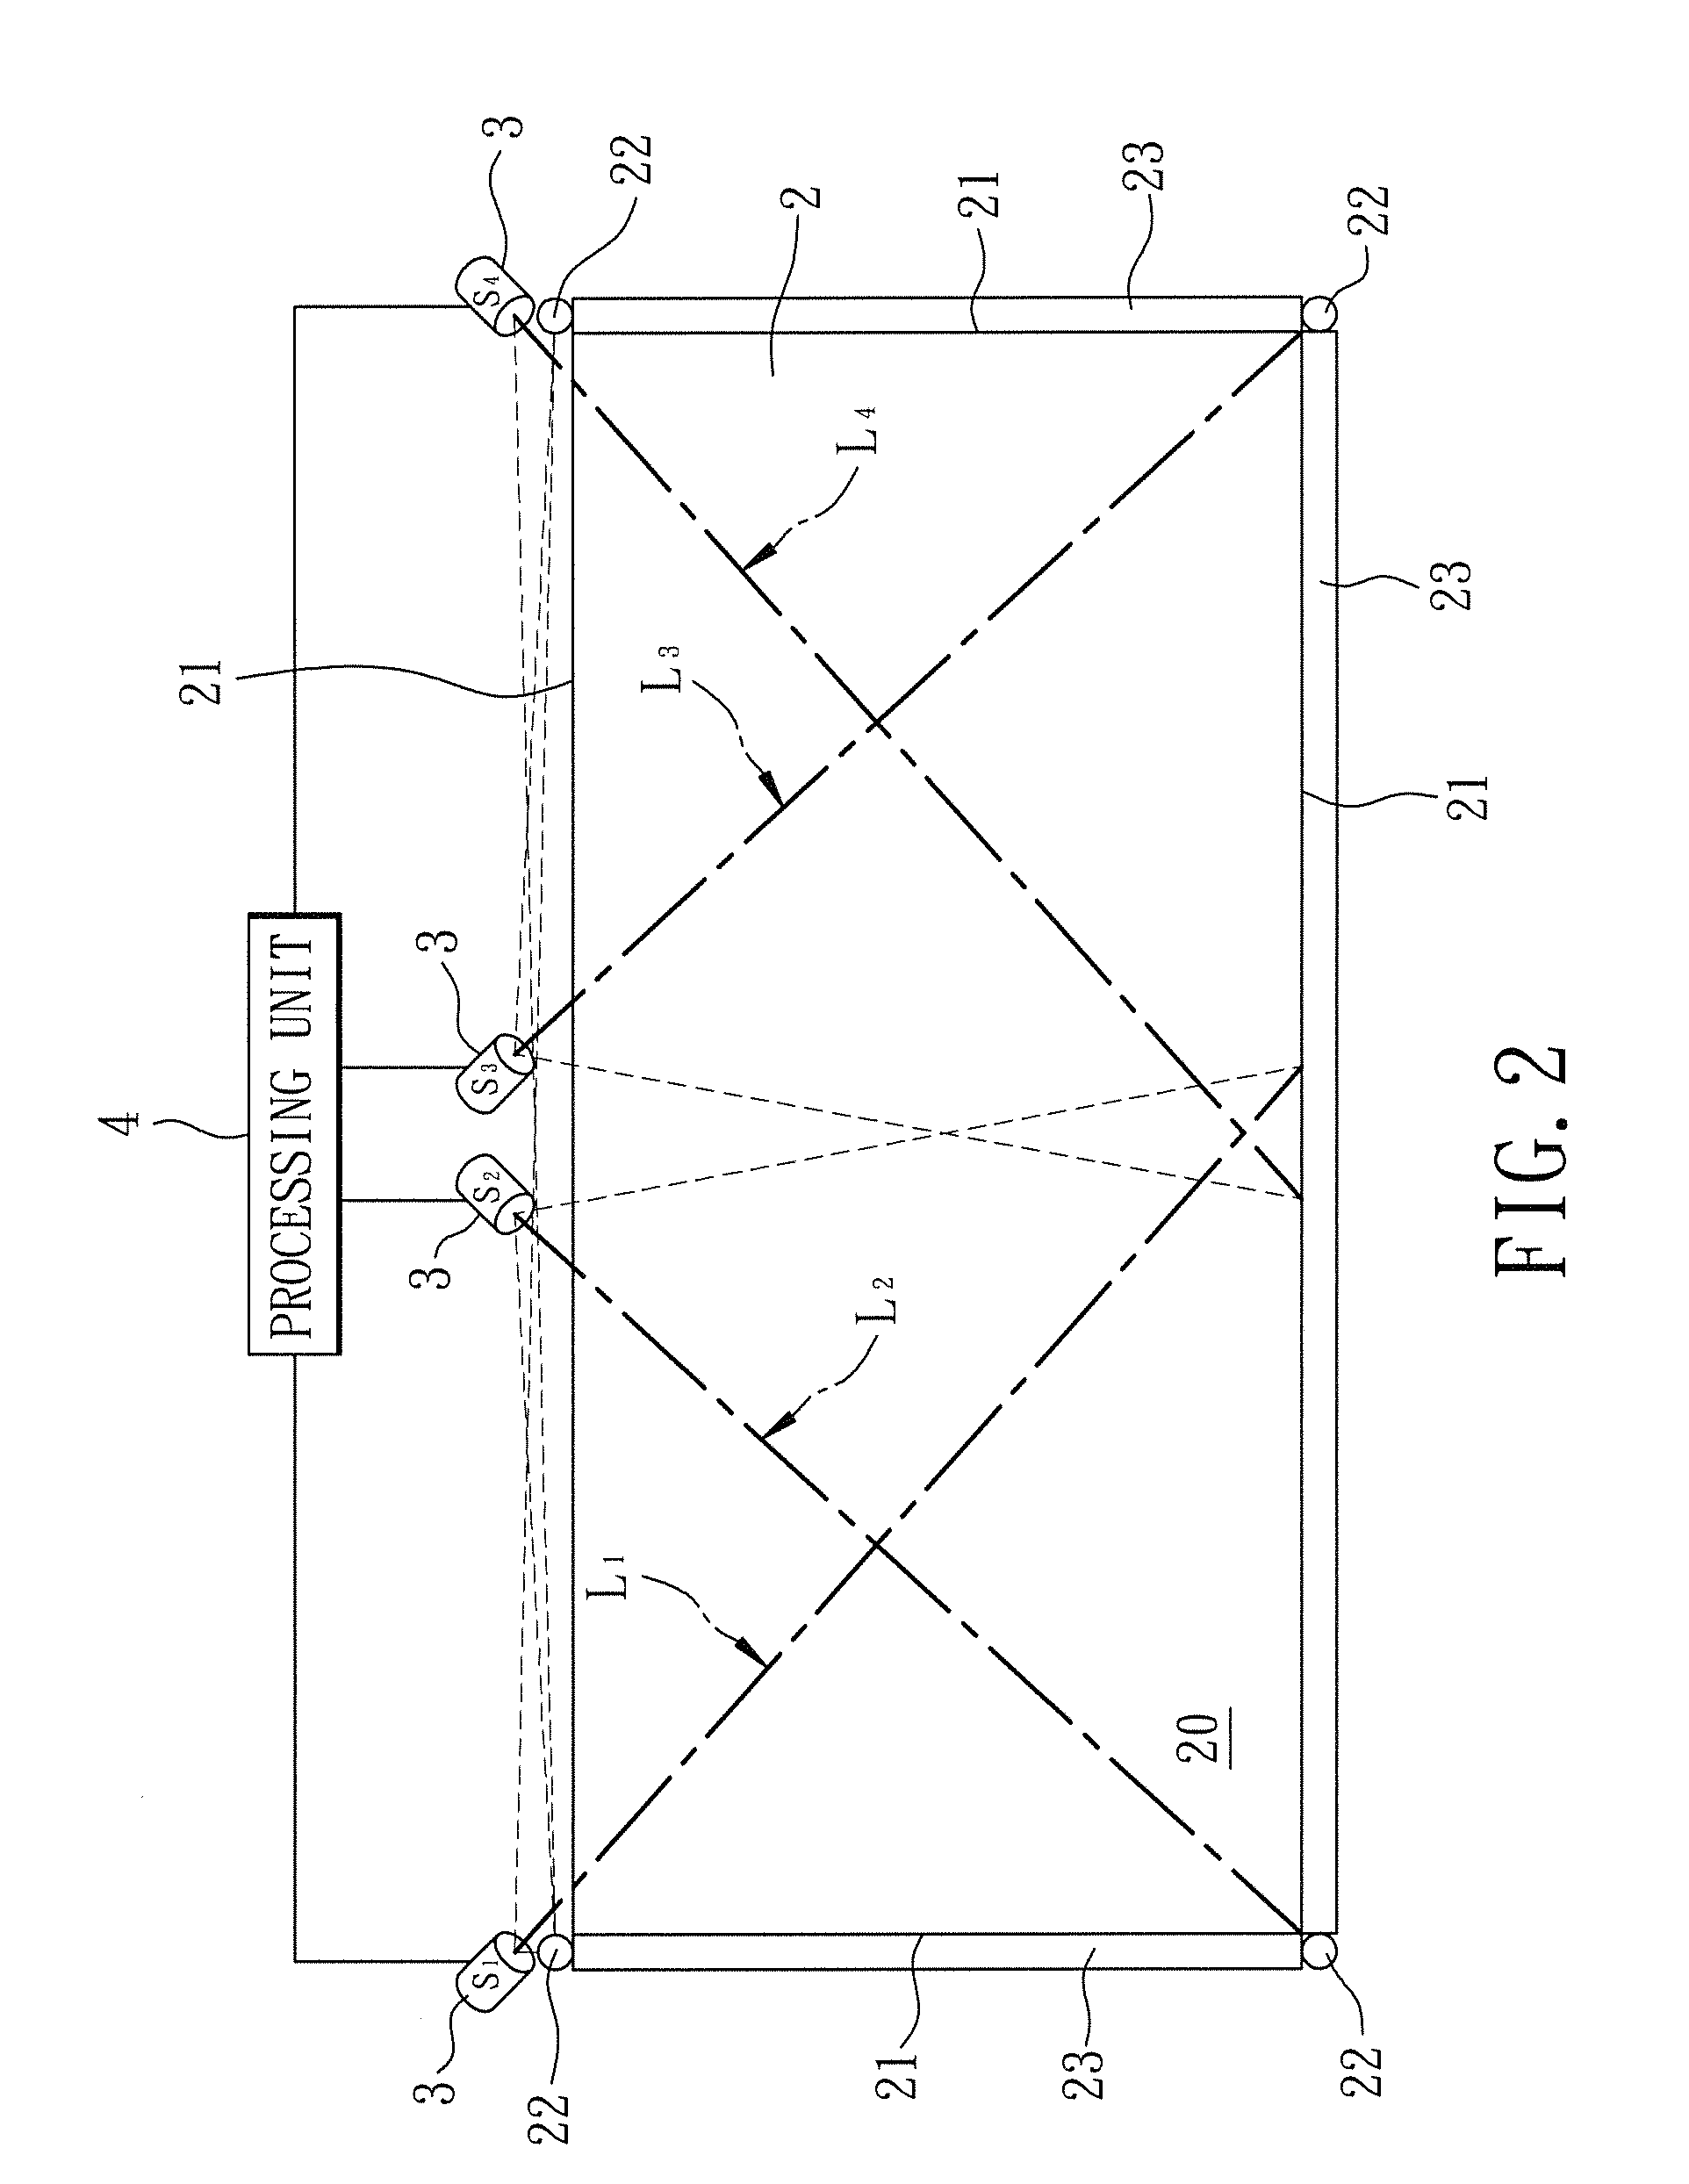 Optical touch panel and method of detecting touch point positions on an optical touch panel